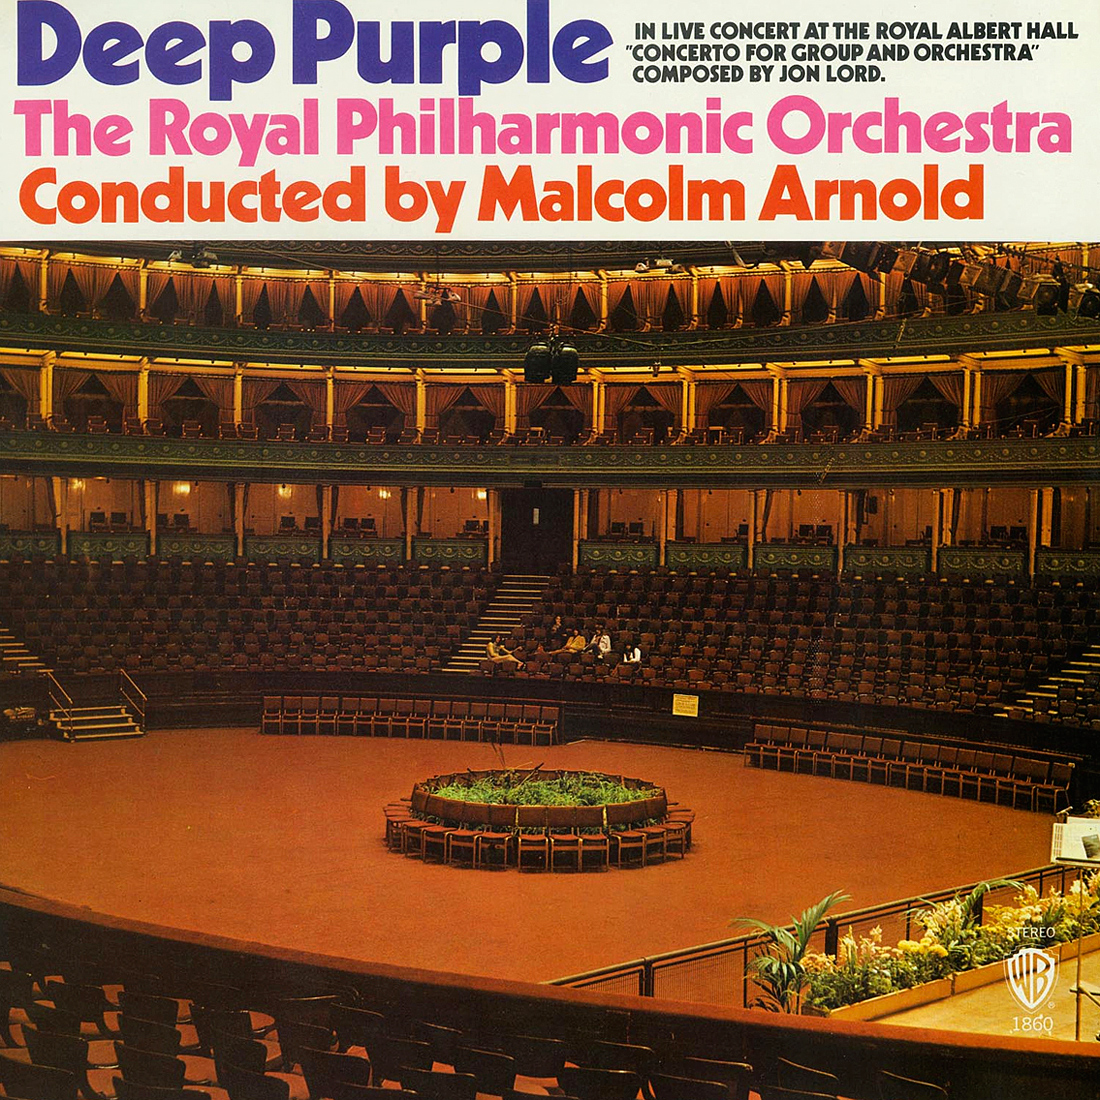 Deep Purple - Concerto For Group And Orchestra (1969/2012) [HDTracks FLAC 24bit/192kHz]